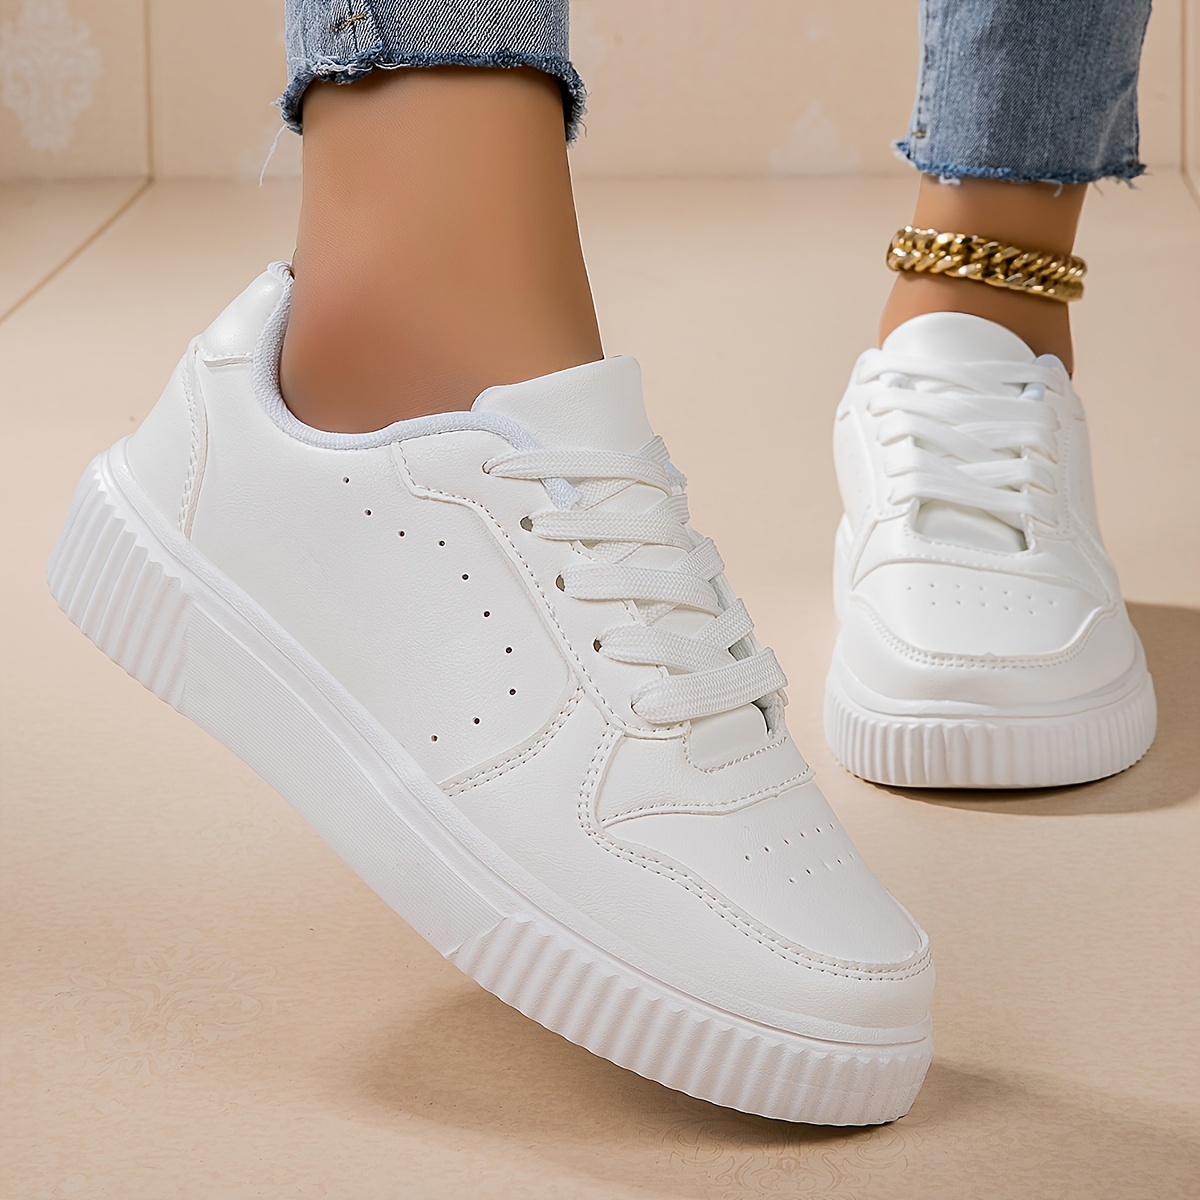 womens solid color sneakers casual lightweight low top skate shoes comfortable white lace up shoes details 1